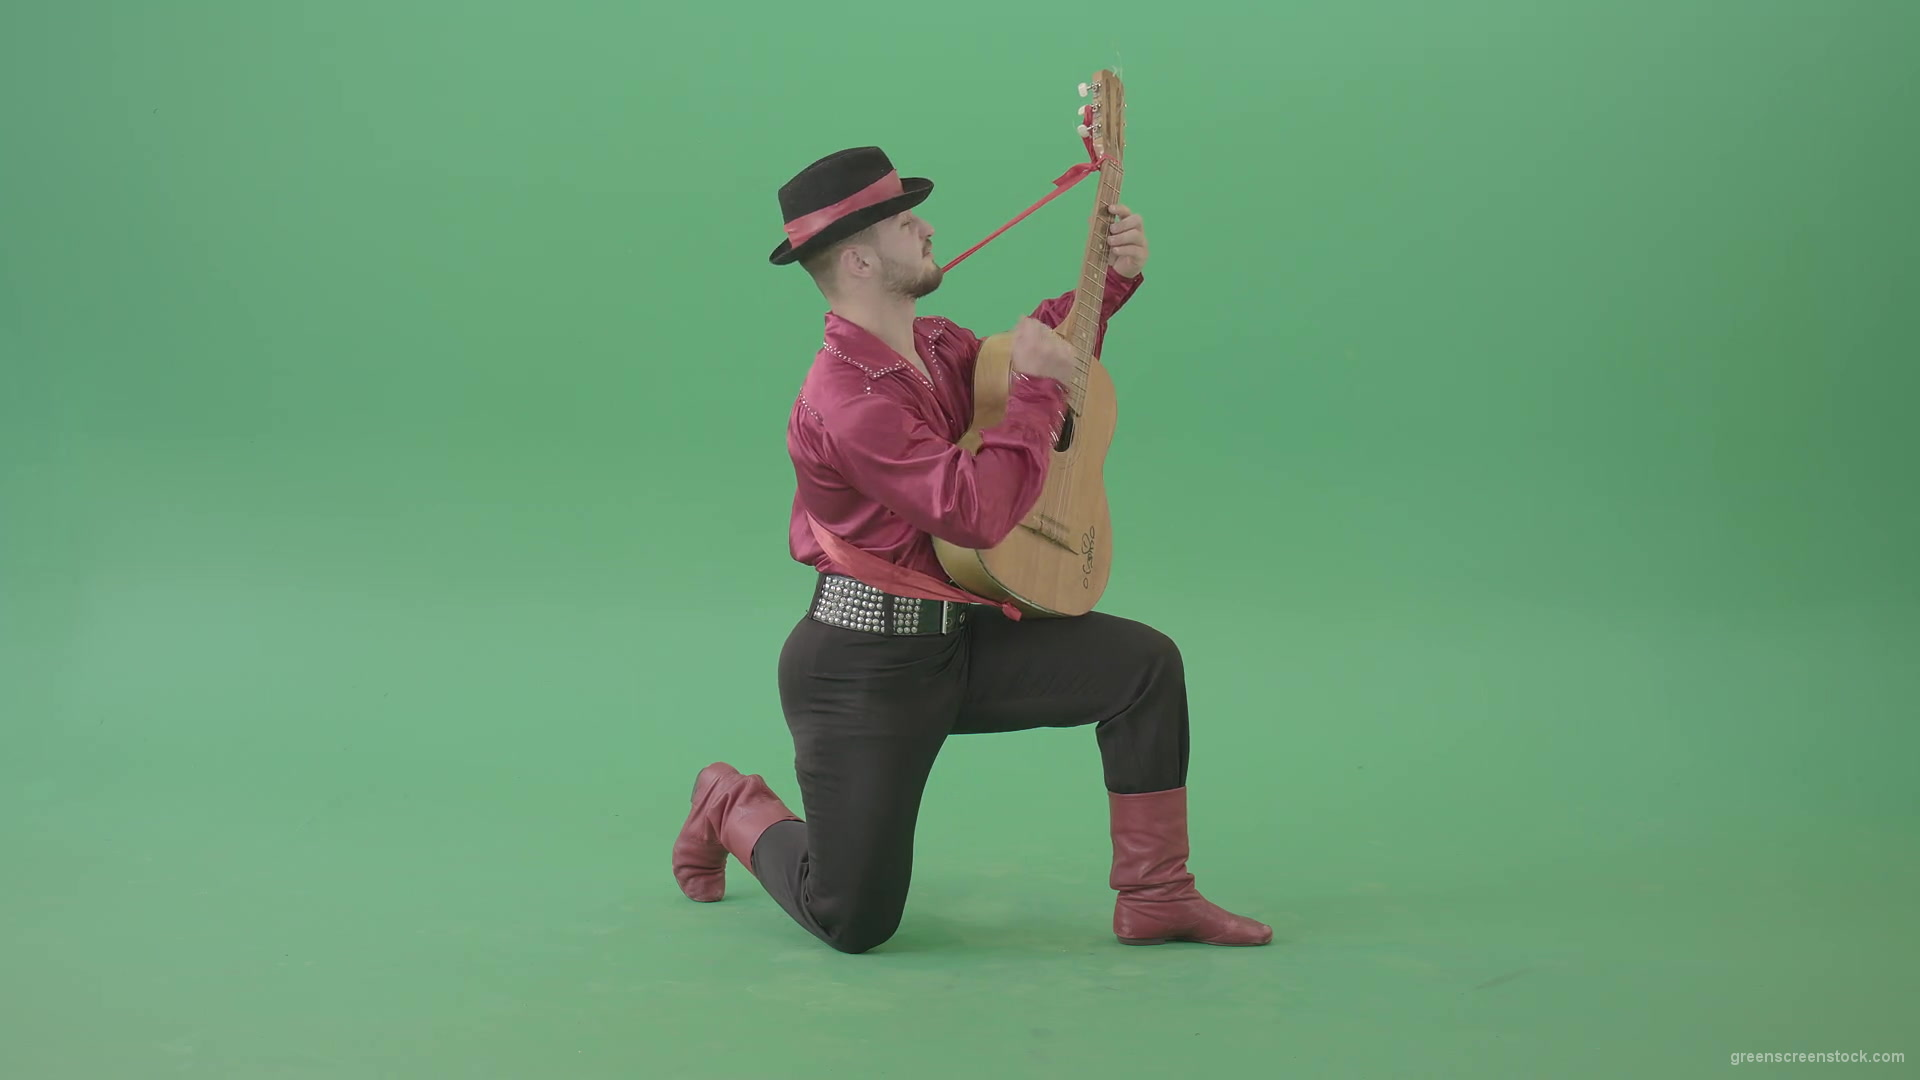 Man-in-Gipsy-costume-playing-love-song-on-guitar-isolated-on-green-screen-4K-Video-Footage-1920_006 Green Screen Stock